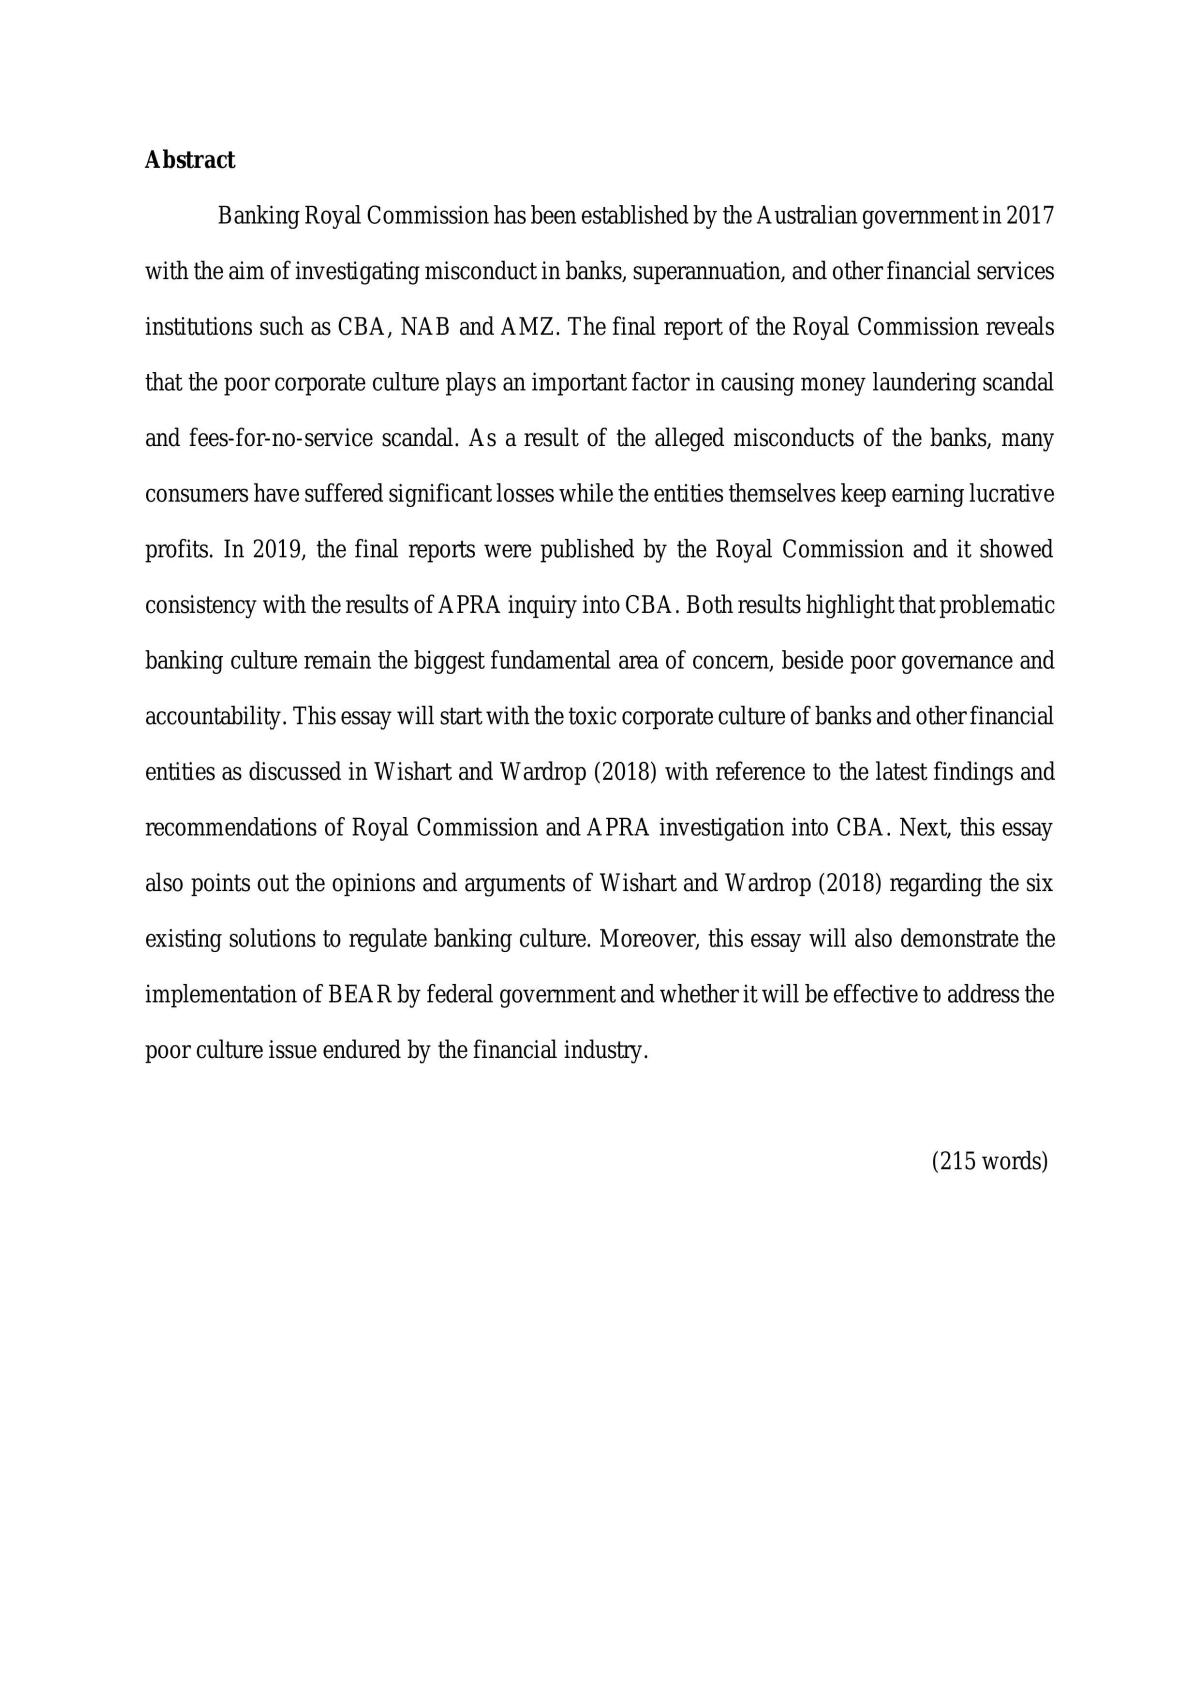 BRC Essay Misconducts of Banks - Page 1